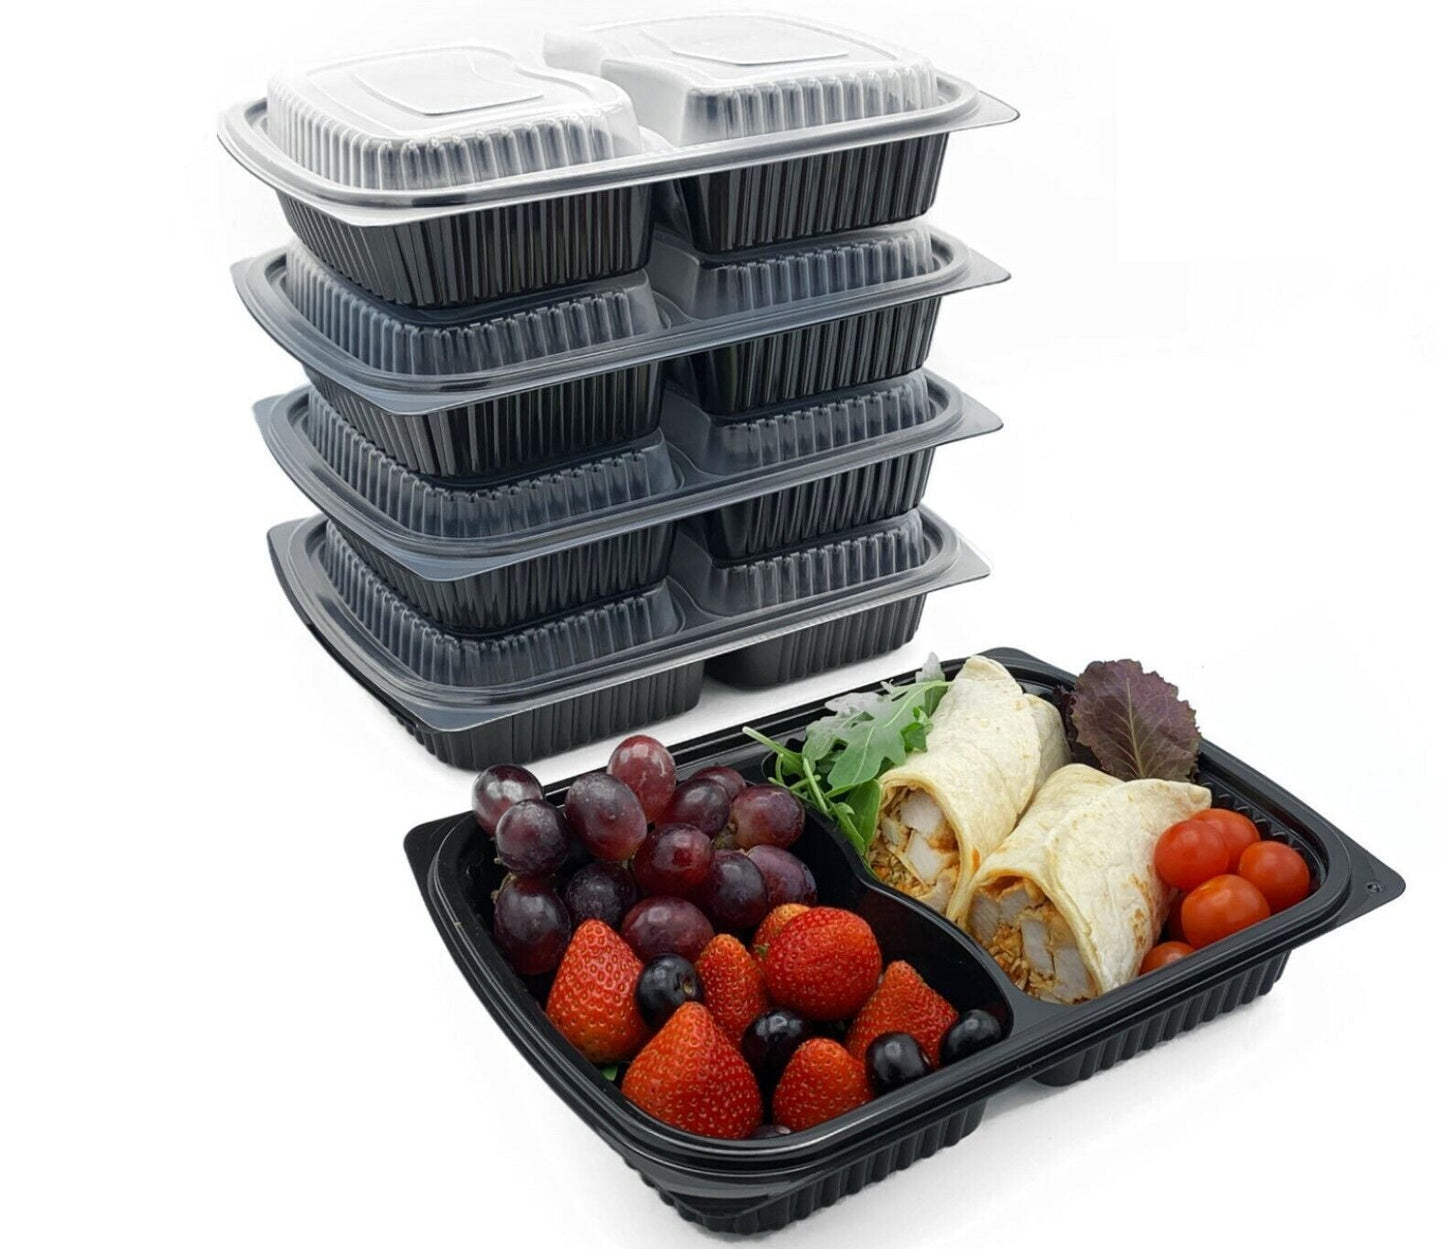 Somoplast [821] 1250cc 2 Compartment Black Microwaveable Container (Base)